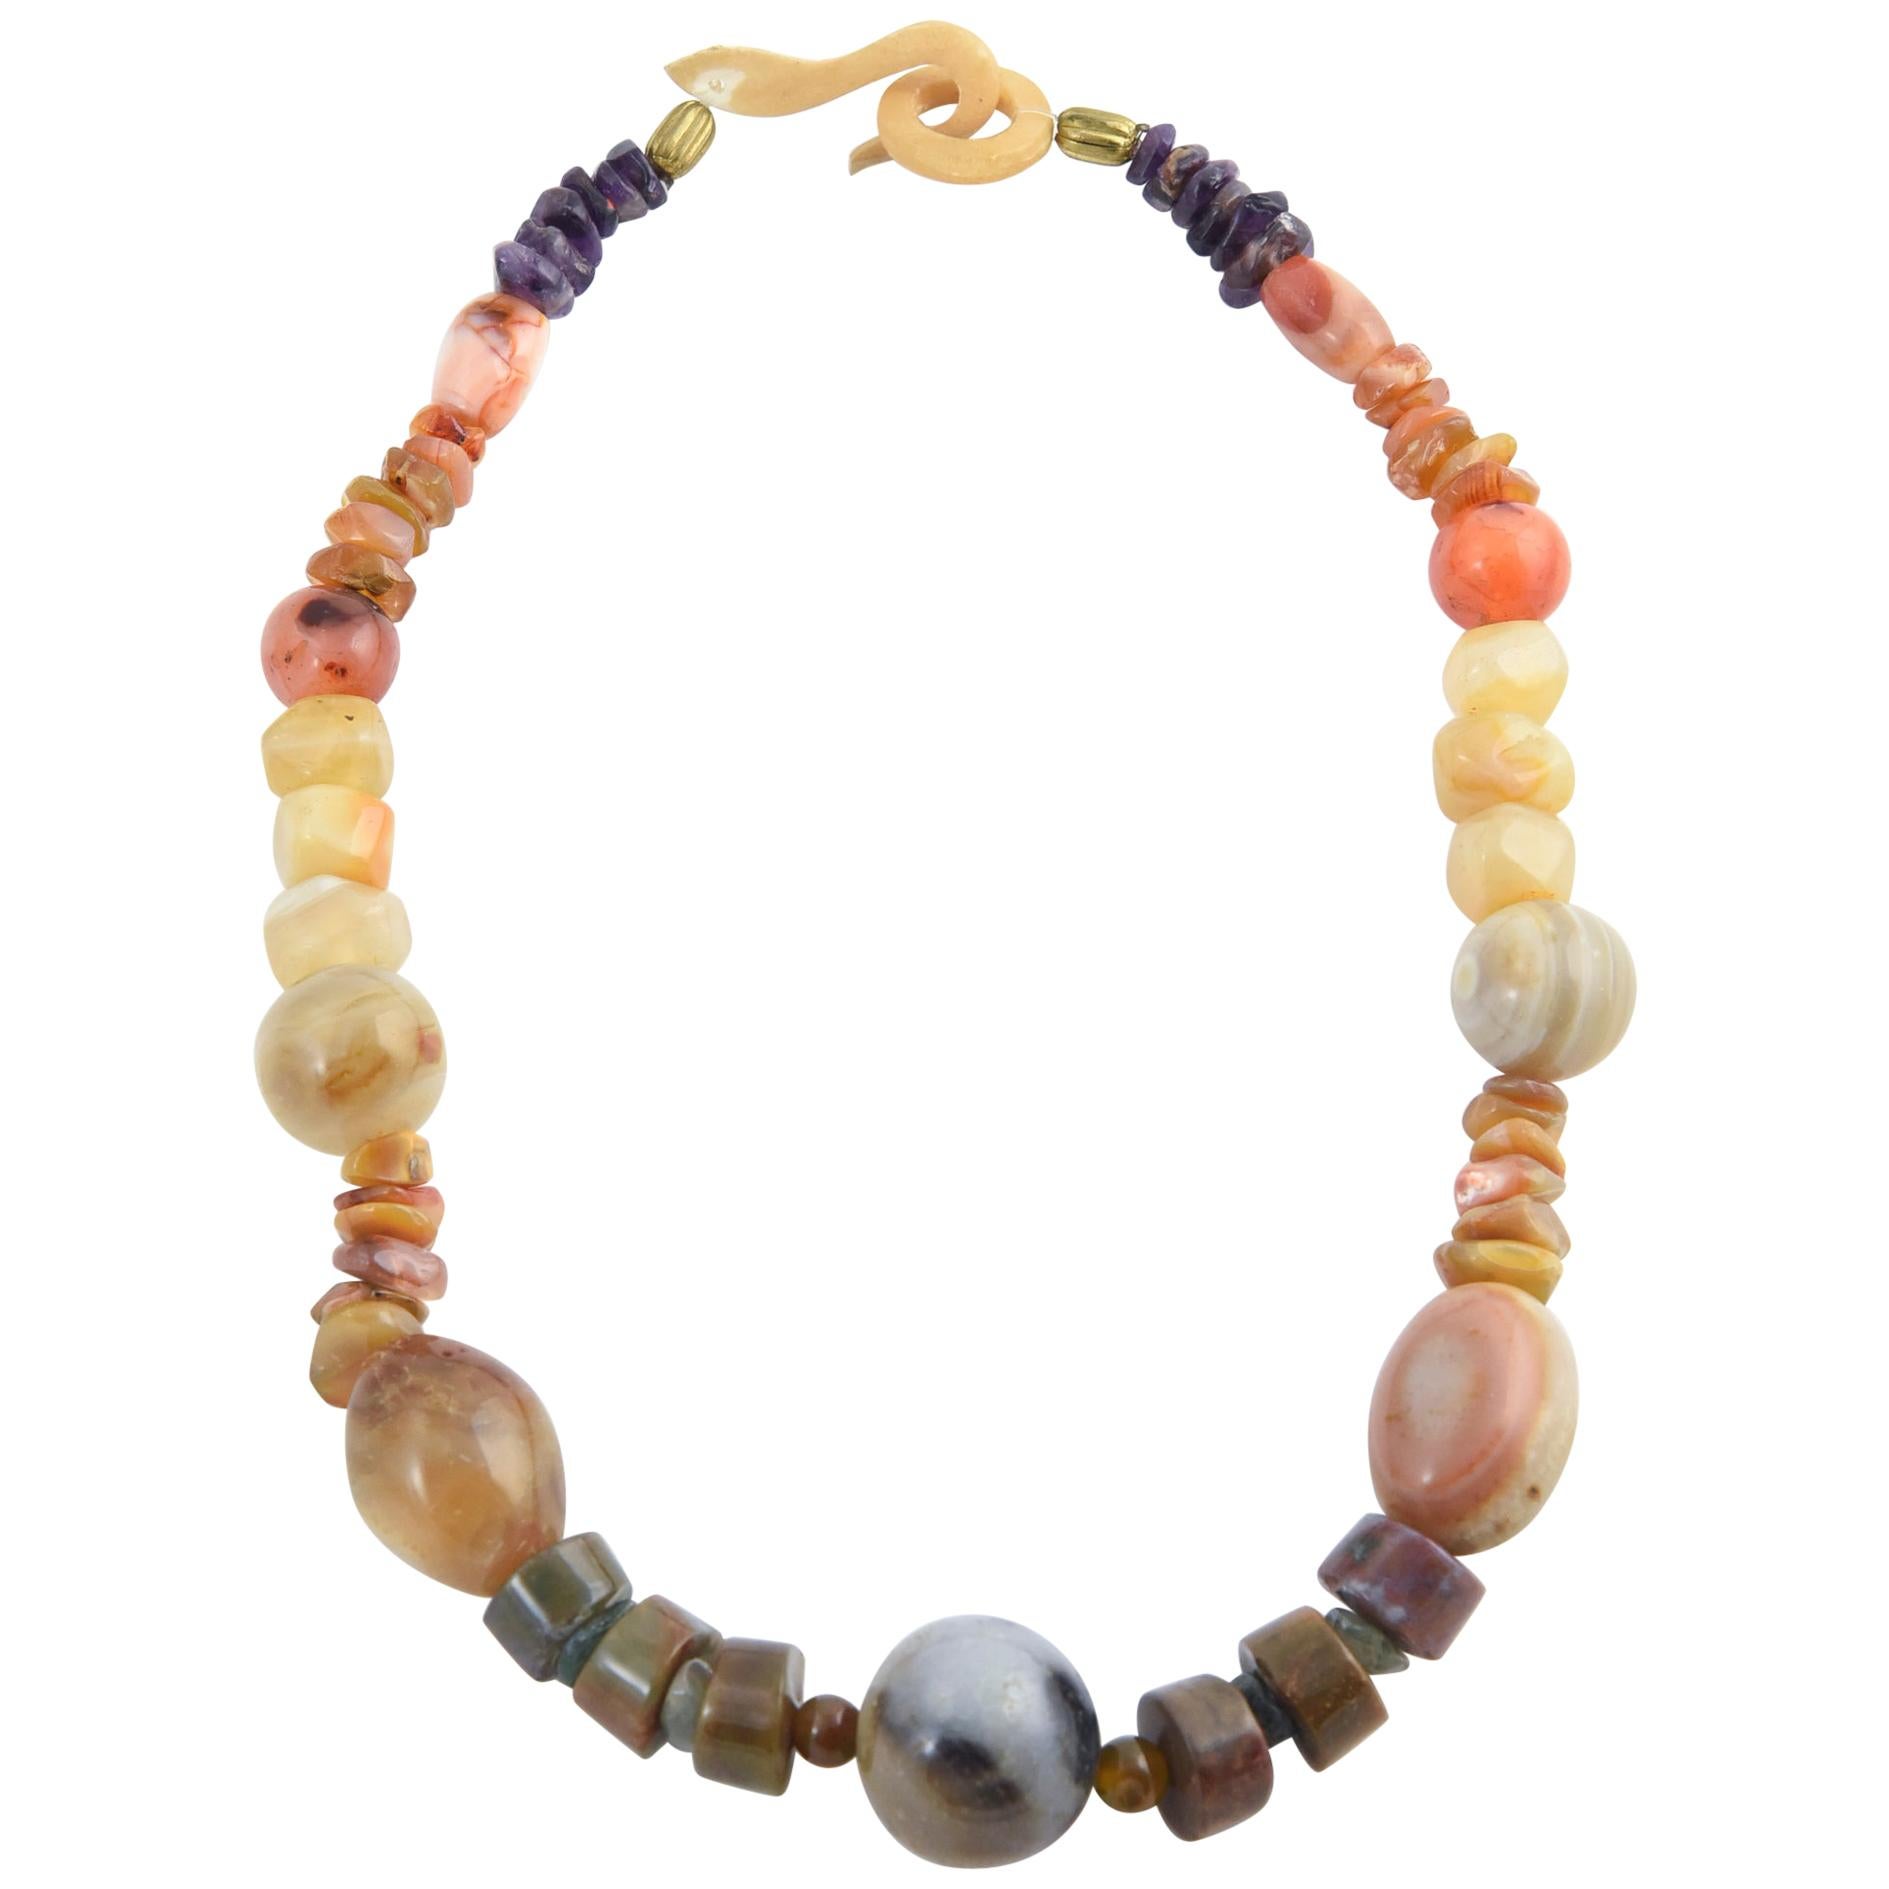 Multicolored Agate and Amethyst Bead Necklace